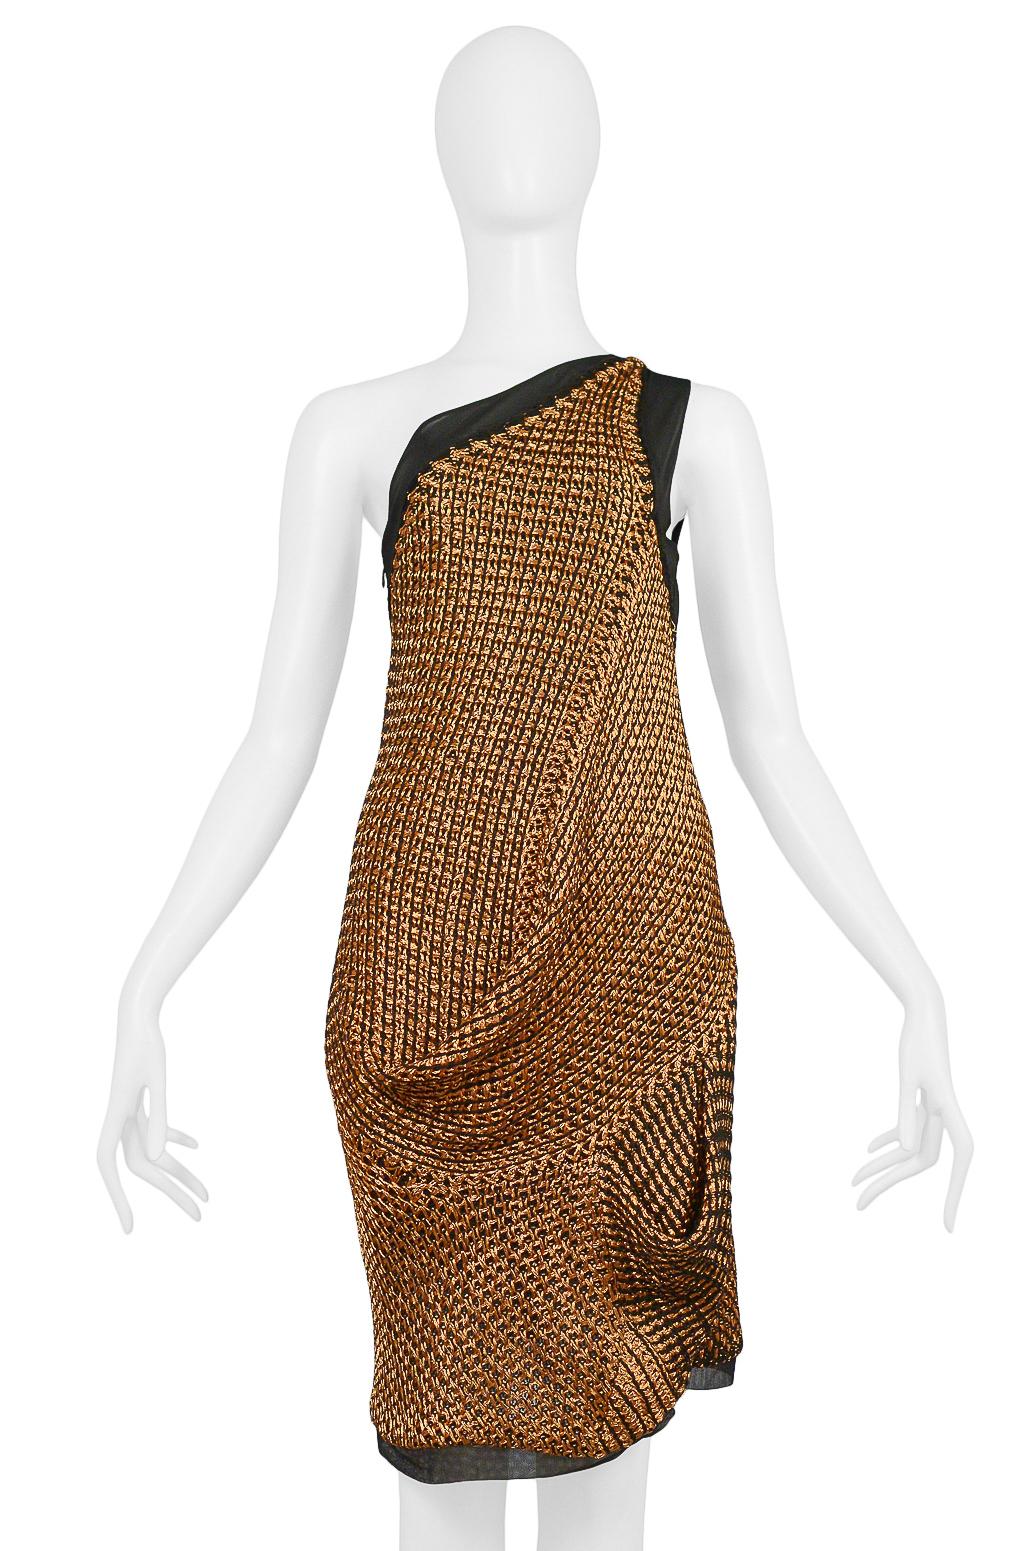 Resurrection Vintage is excited to offer a vintage Balenciaga by Nicolas Ghesquiere copper knit cocktail dress featuring an asymmetrical bodice, drape skirt, black mesh trim, and side zipper.
Balenciaga Paris
Designed by Nicolas Ghesquiere
Size